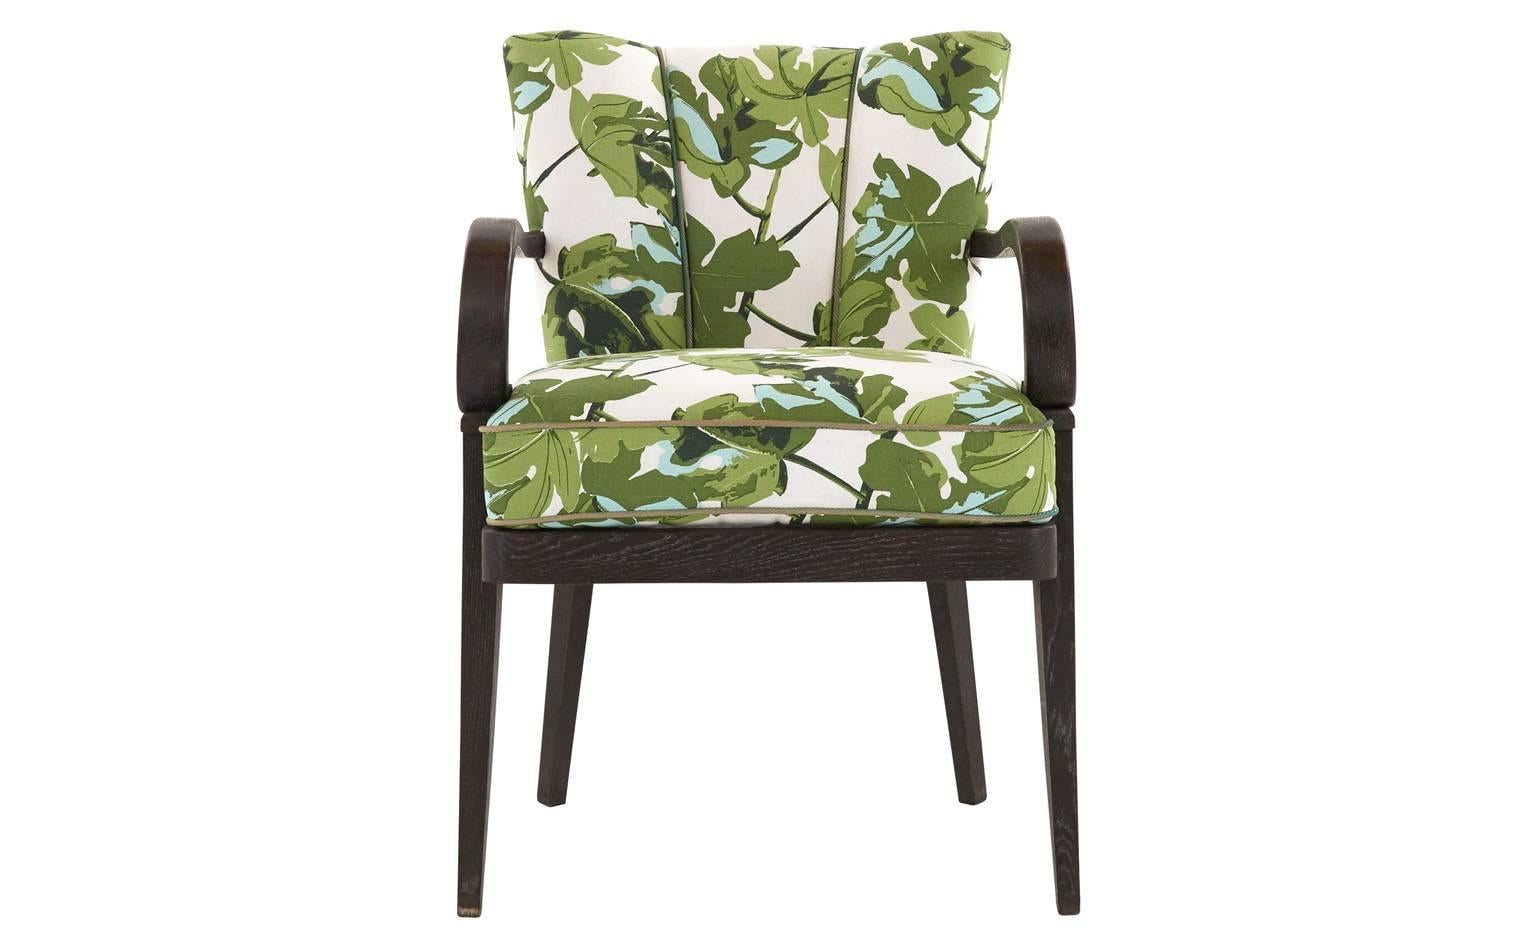 Reupholstered in Peter Dunham fig leaf linen
Original cord trim
Cerused wood frame
Early 20th century,
France

Dimensions:
Overall: 22.5'W x 26.75'D x 31.75'H 
Seat depth 18.5'D 
Seat height: 20.25'H